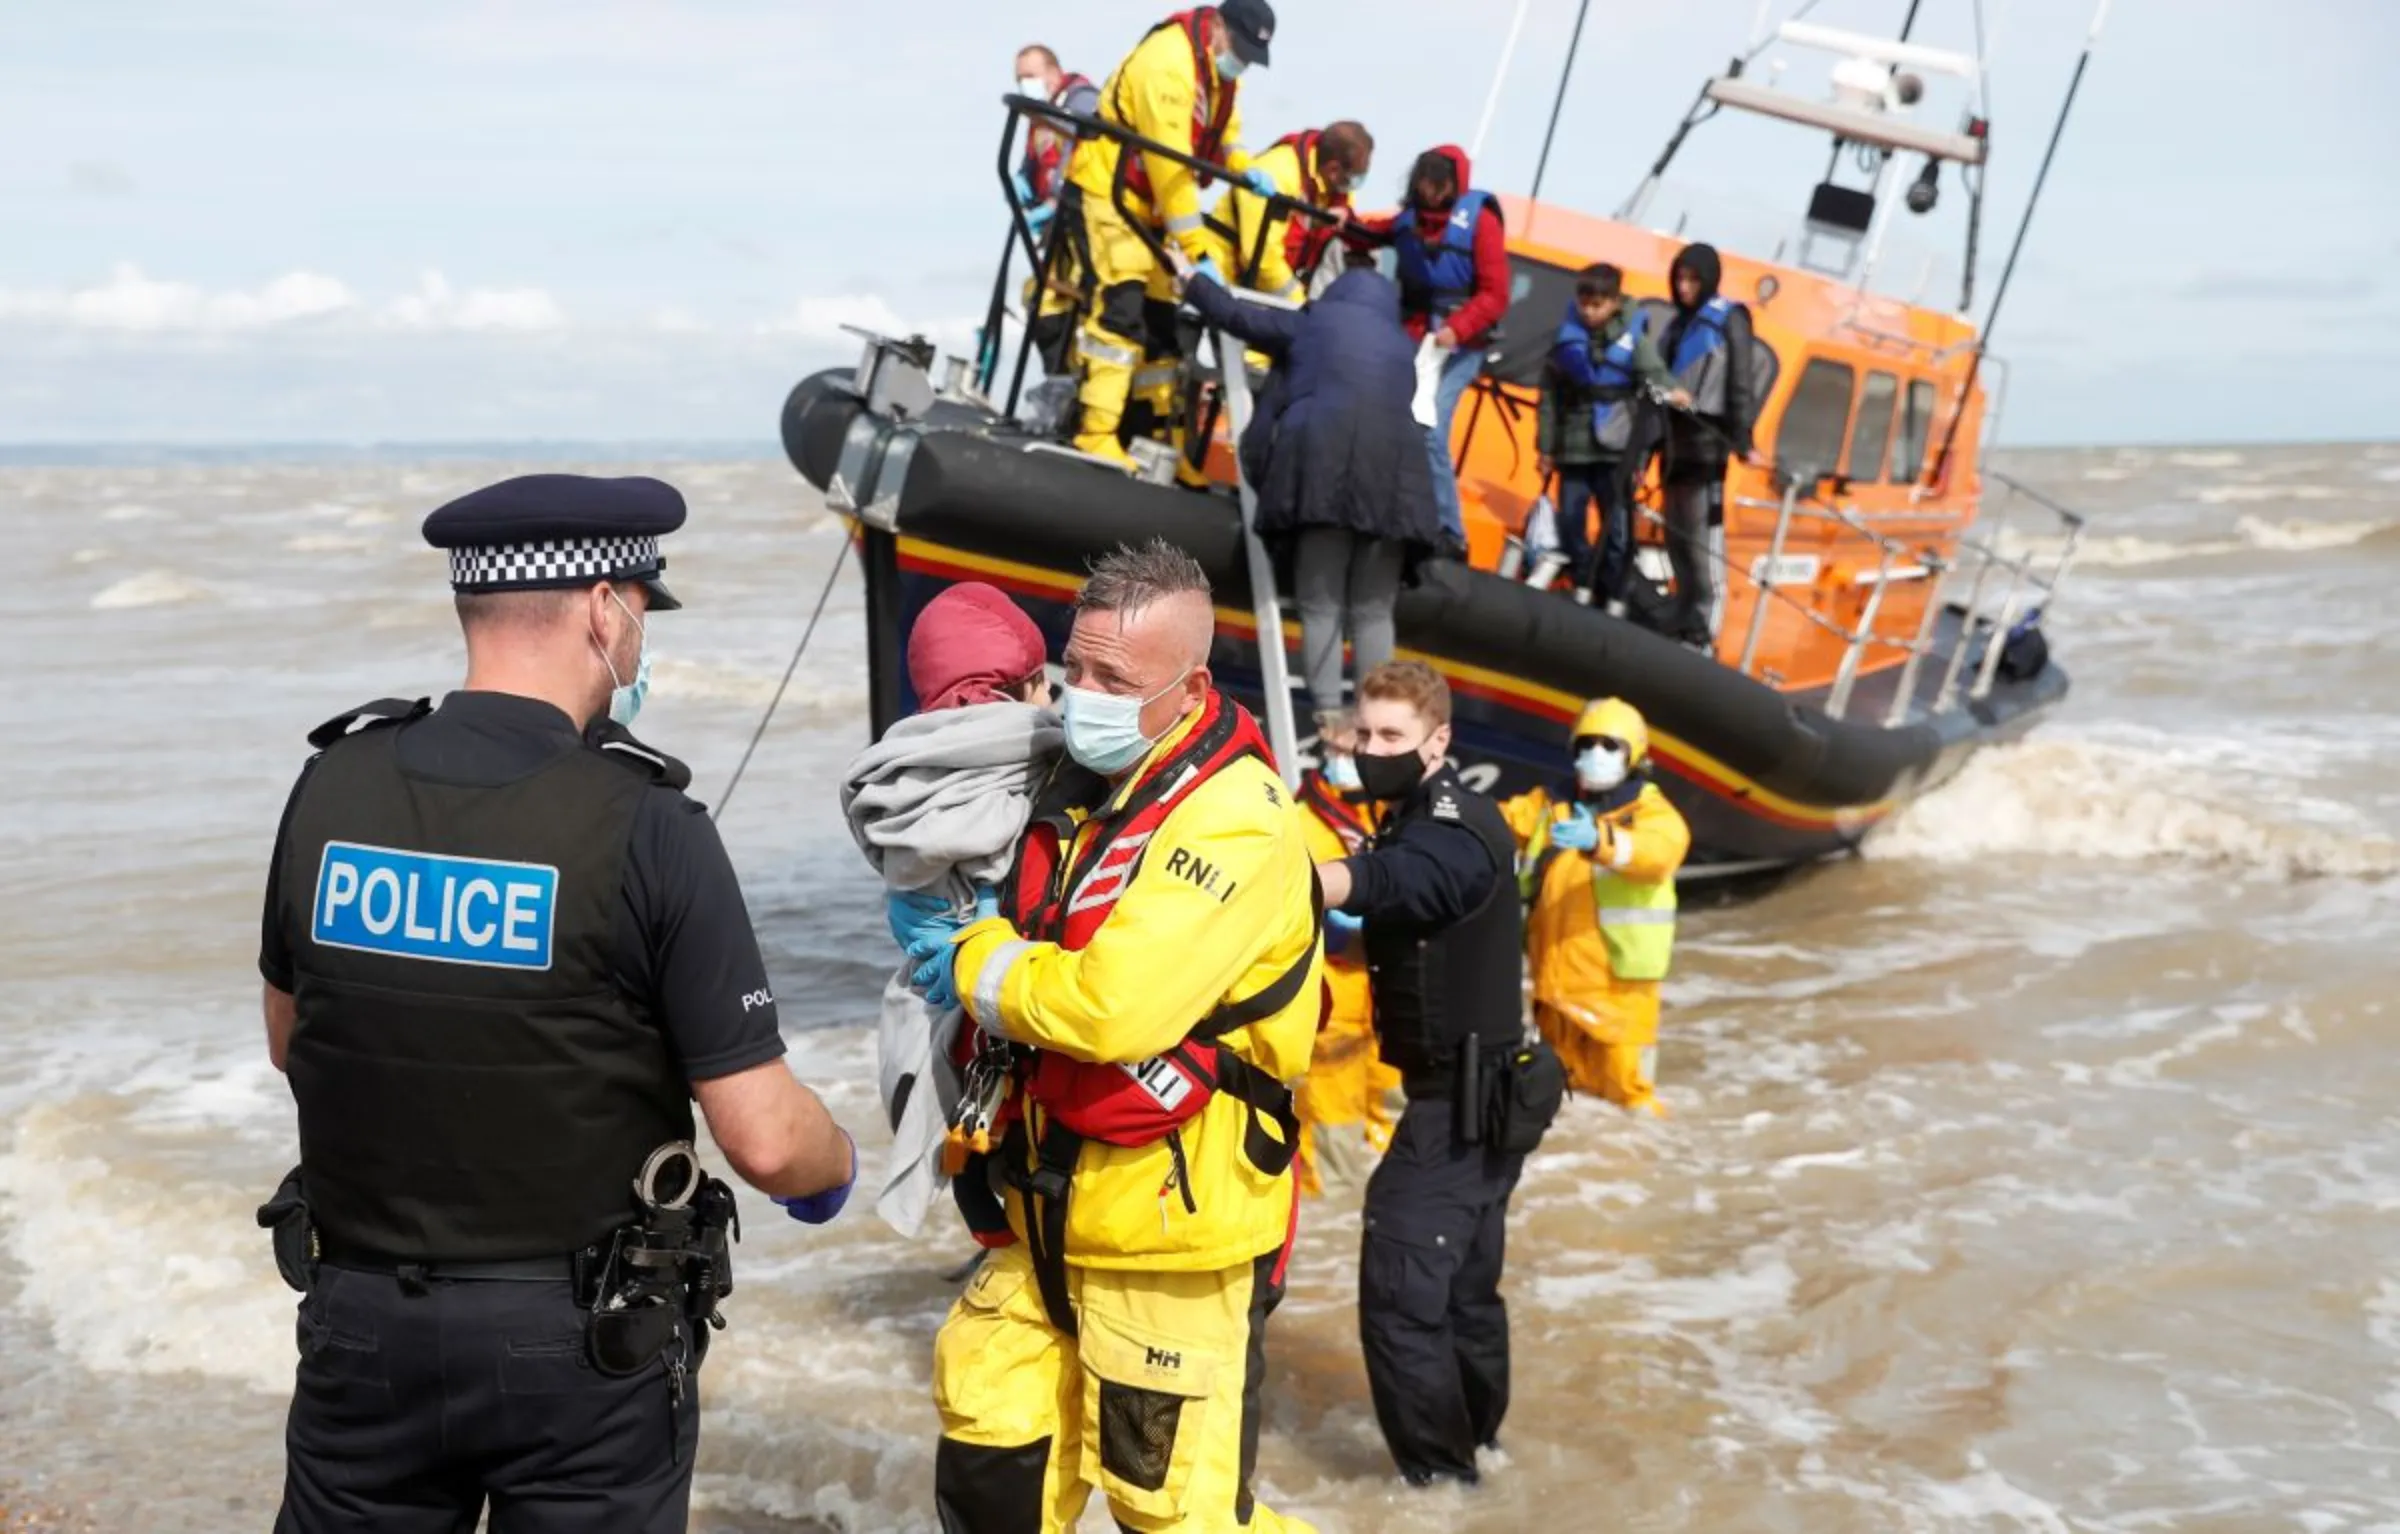 A RNLI boat, with migrants onboard, is met by Border Force Officers and Police at the harbour in Dungeness, Britain, September 13, 2021. REUTERS/Peter Nicholls